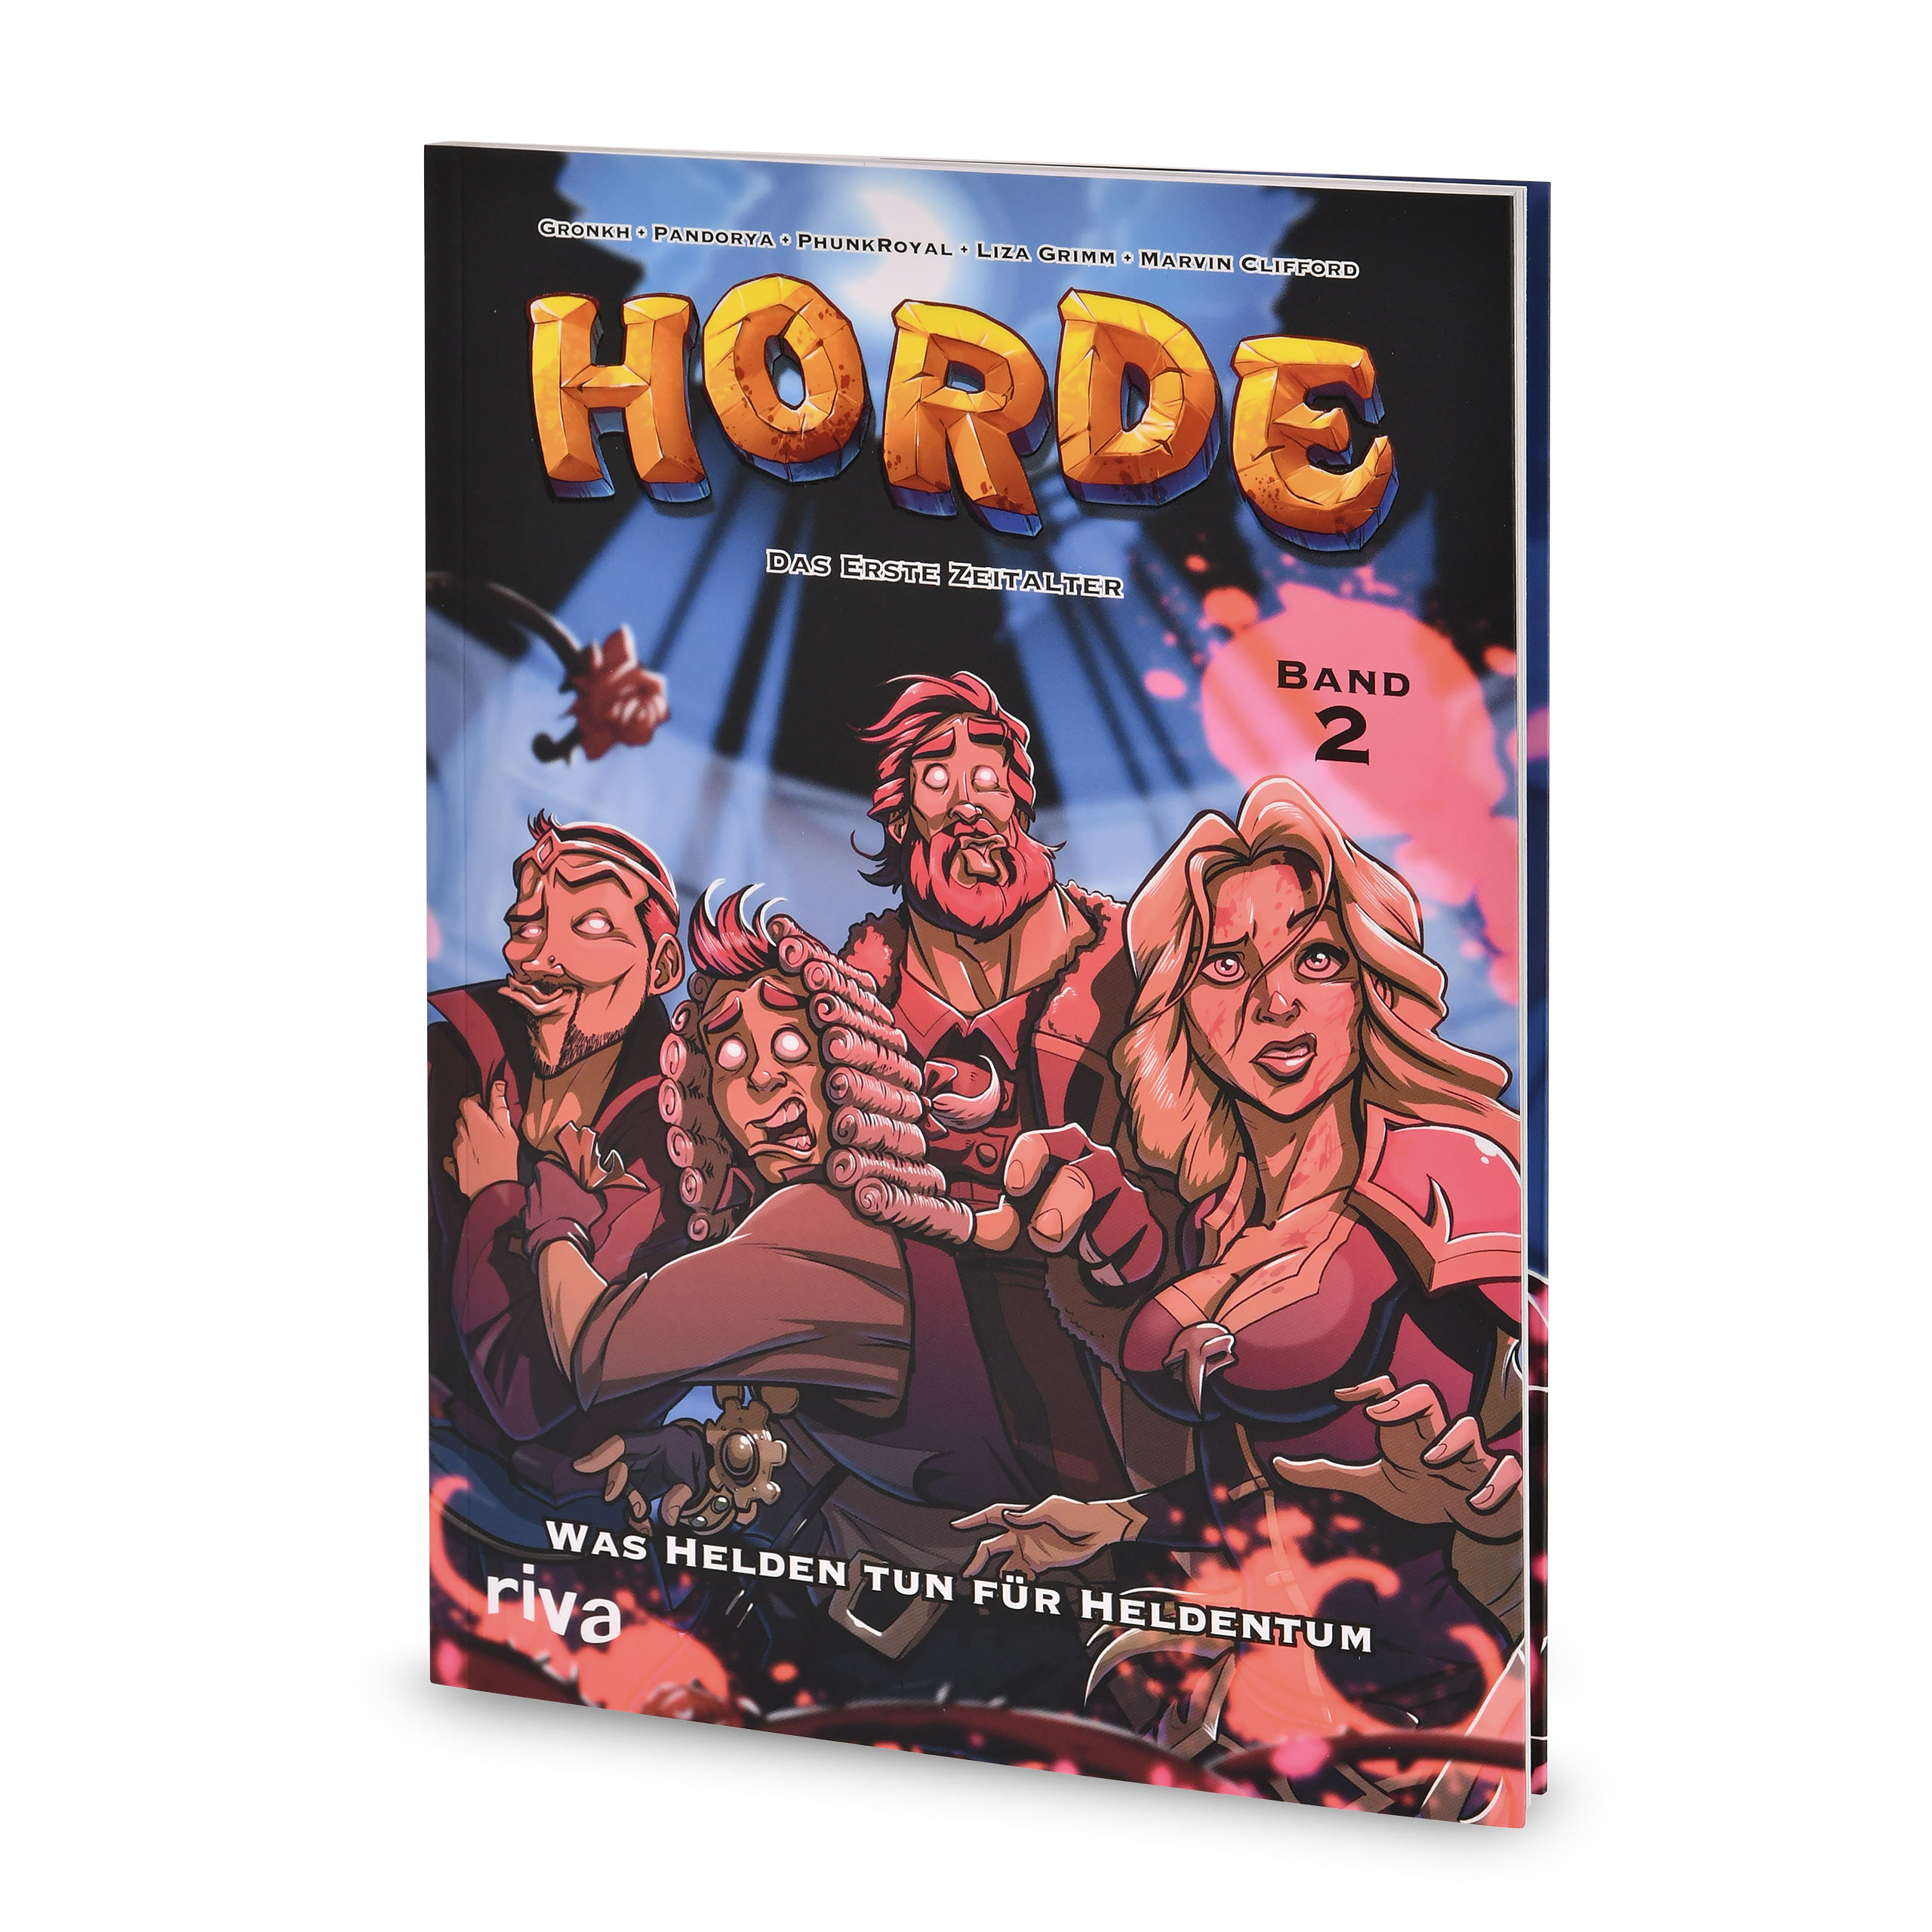 HORDE - The First Age Volume 2